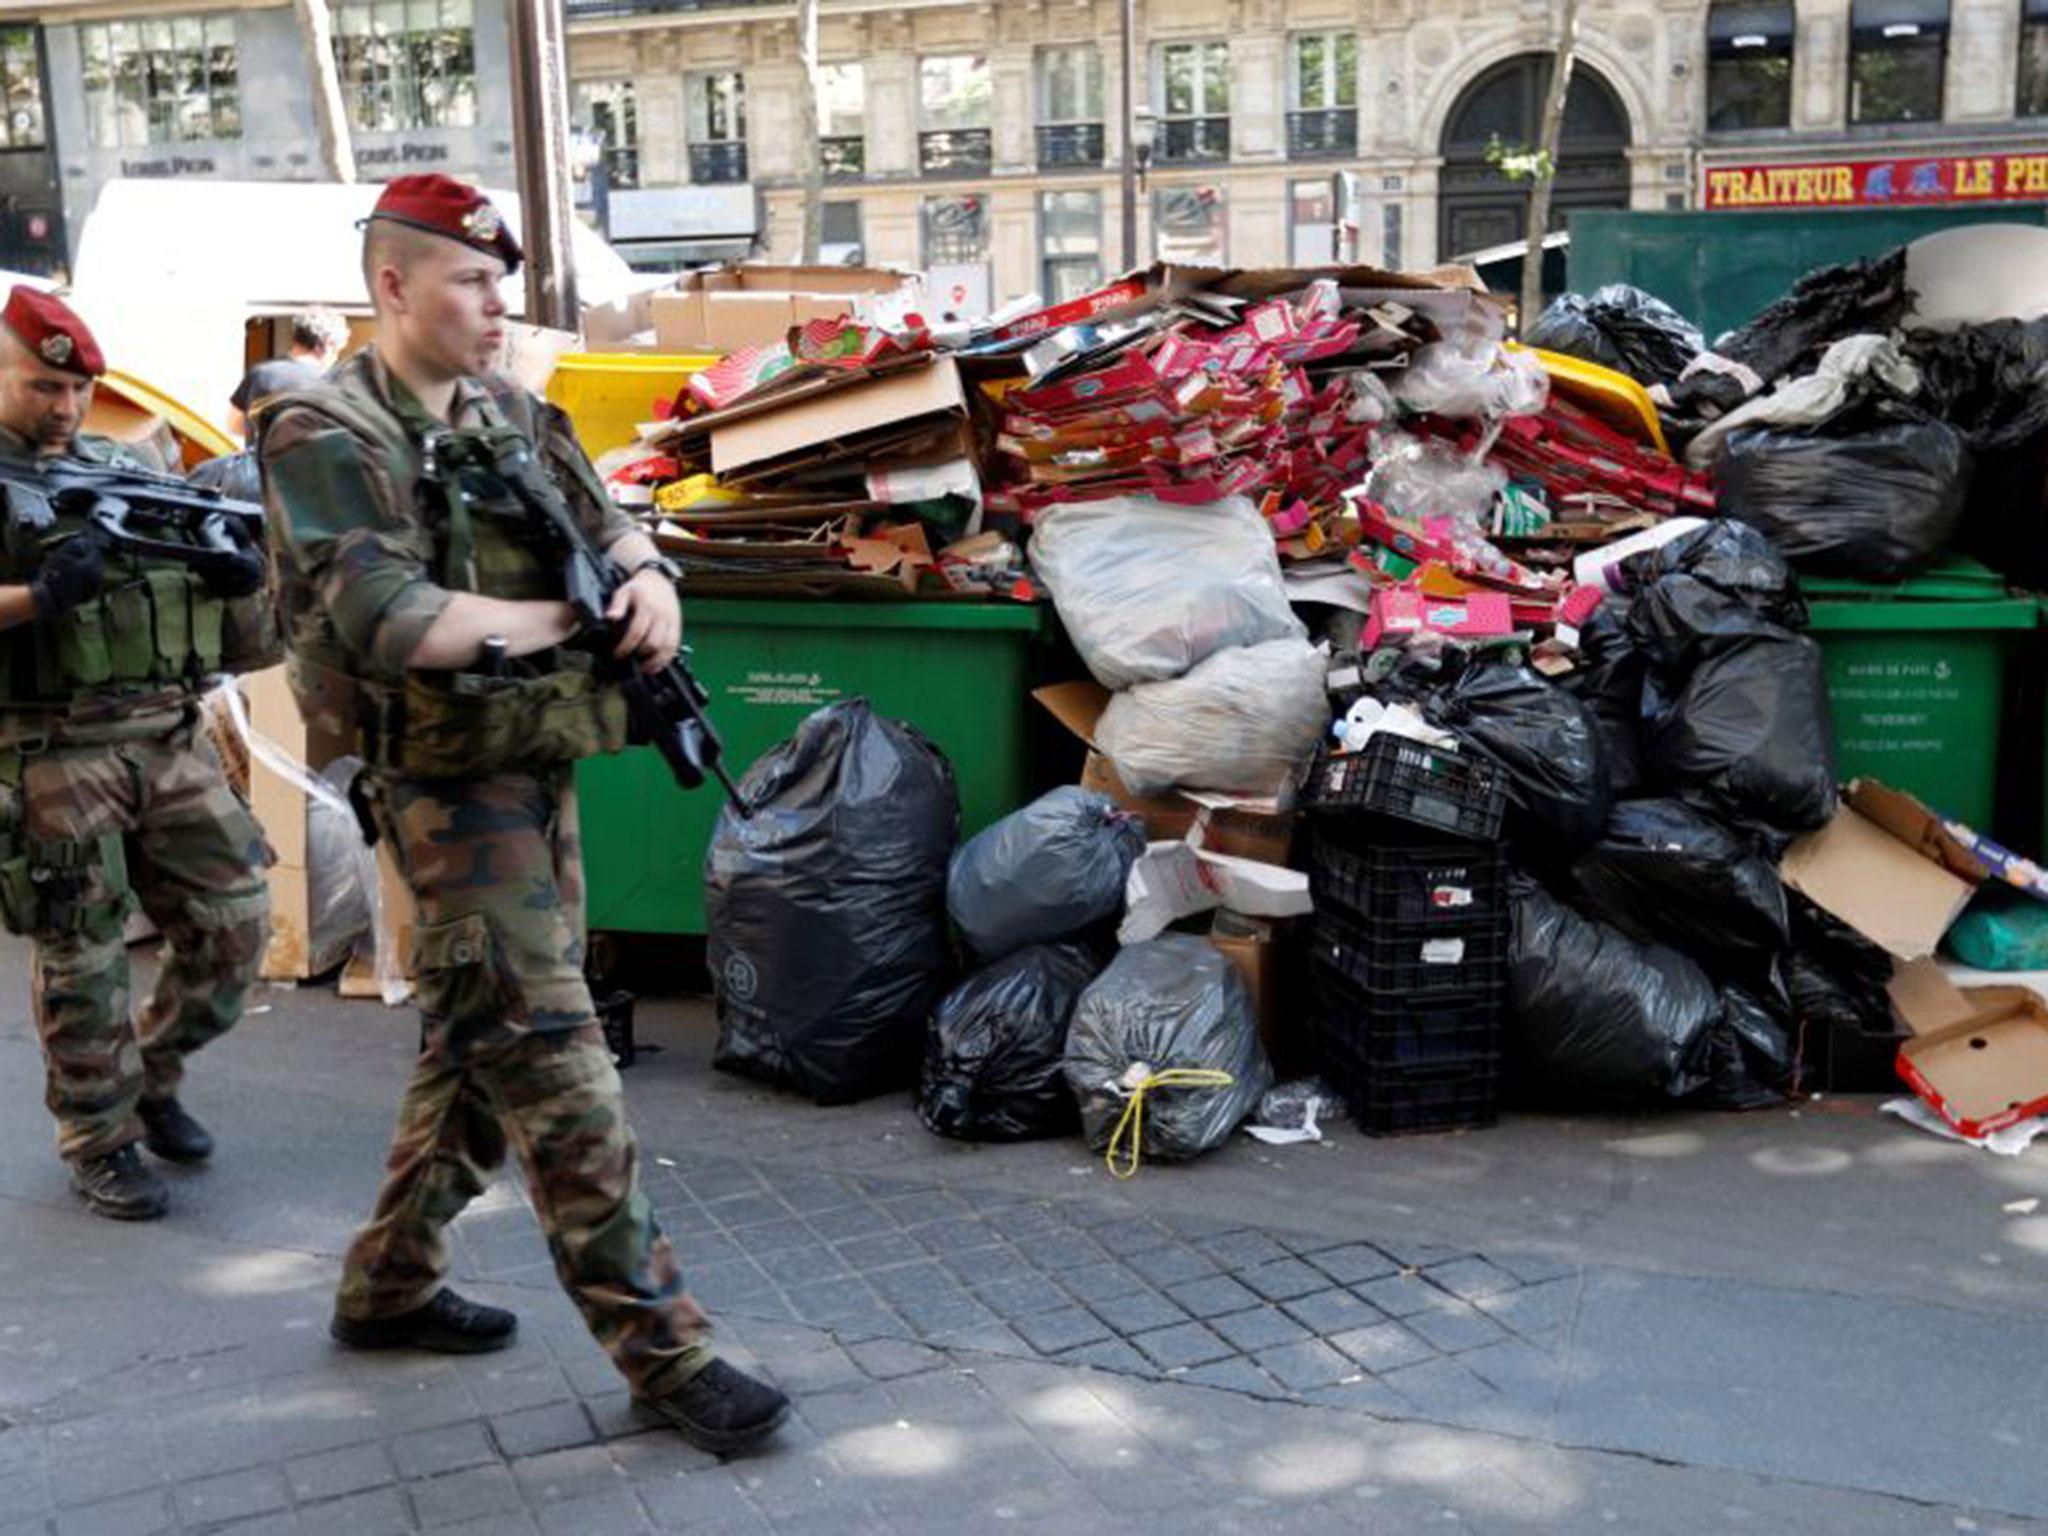 Soldiers pass by a pile of rubbish bags on the Grands boulevards in Paris, France